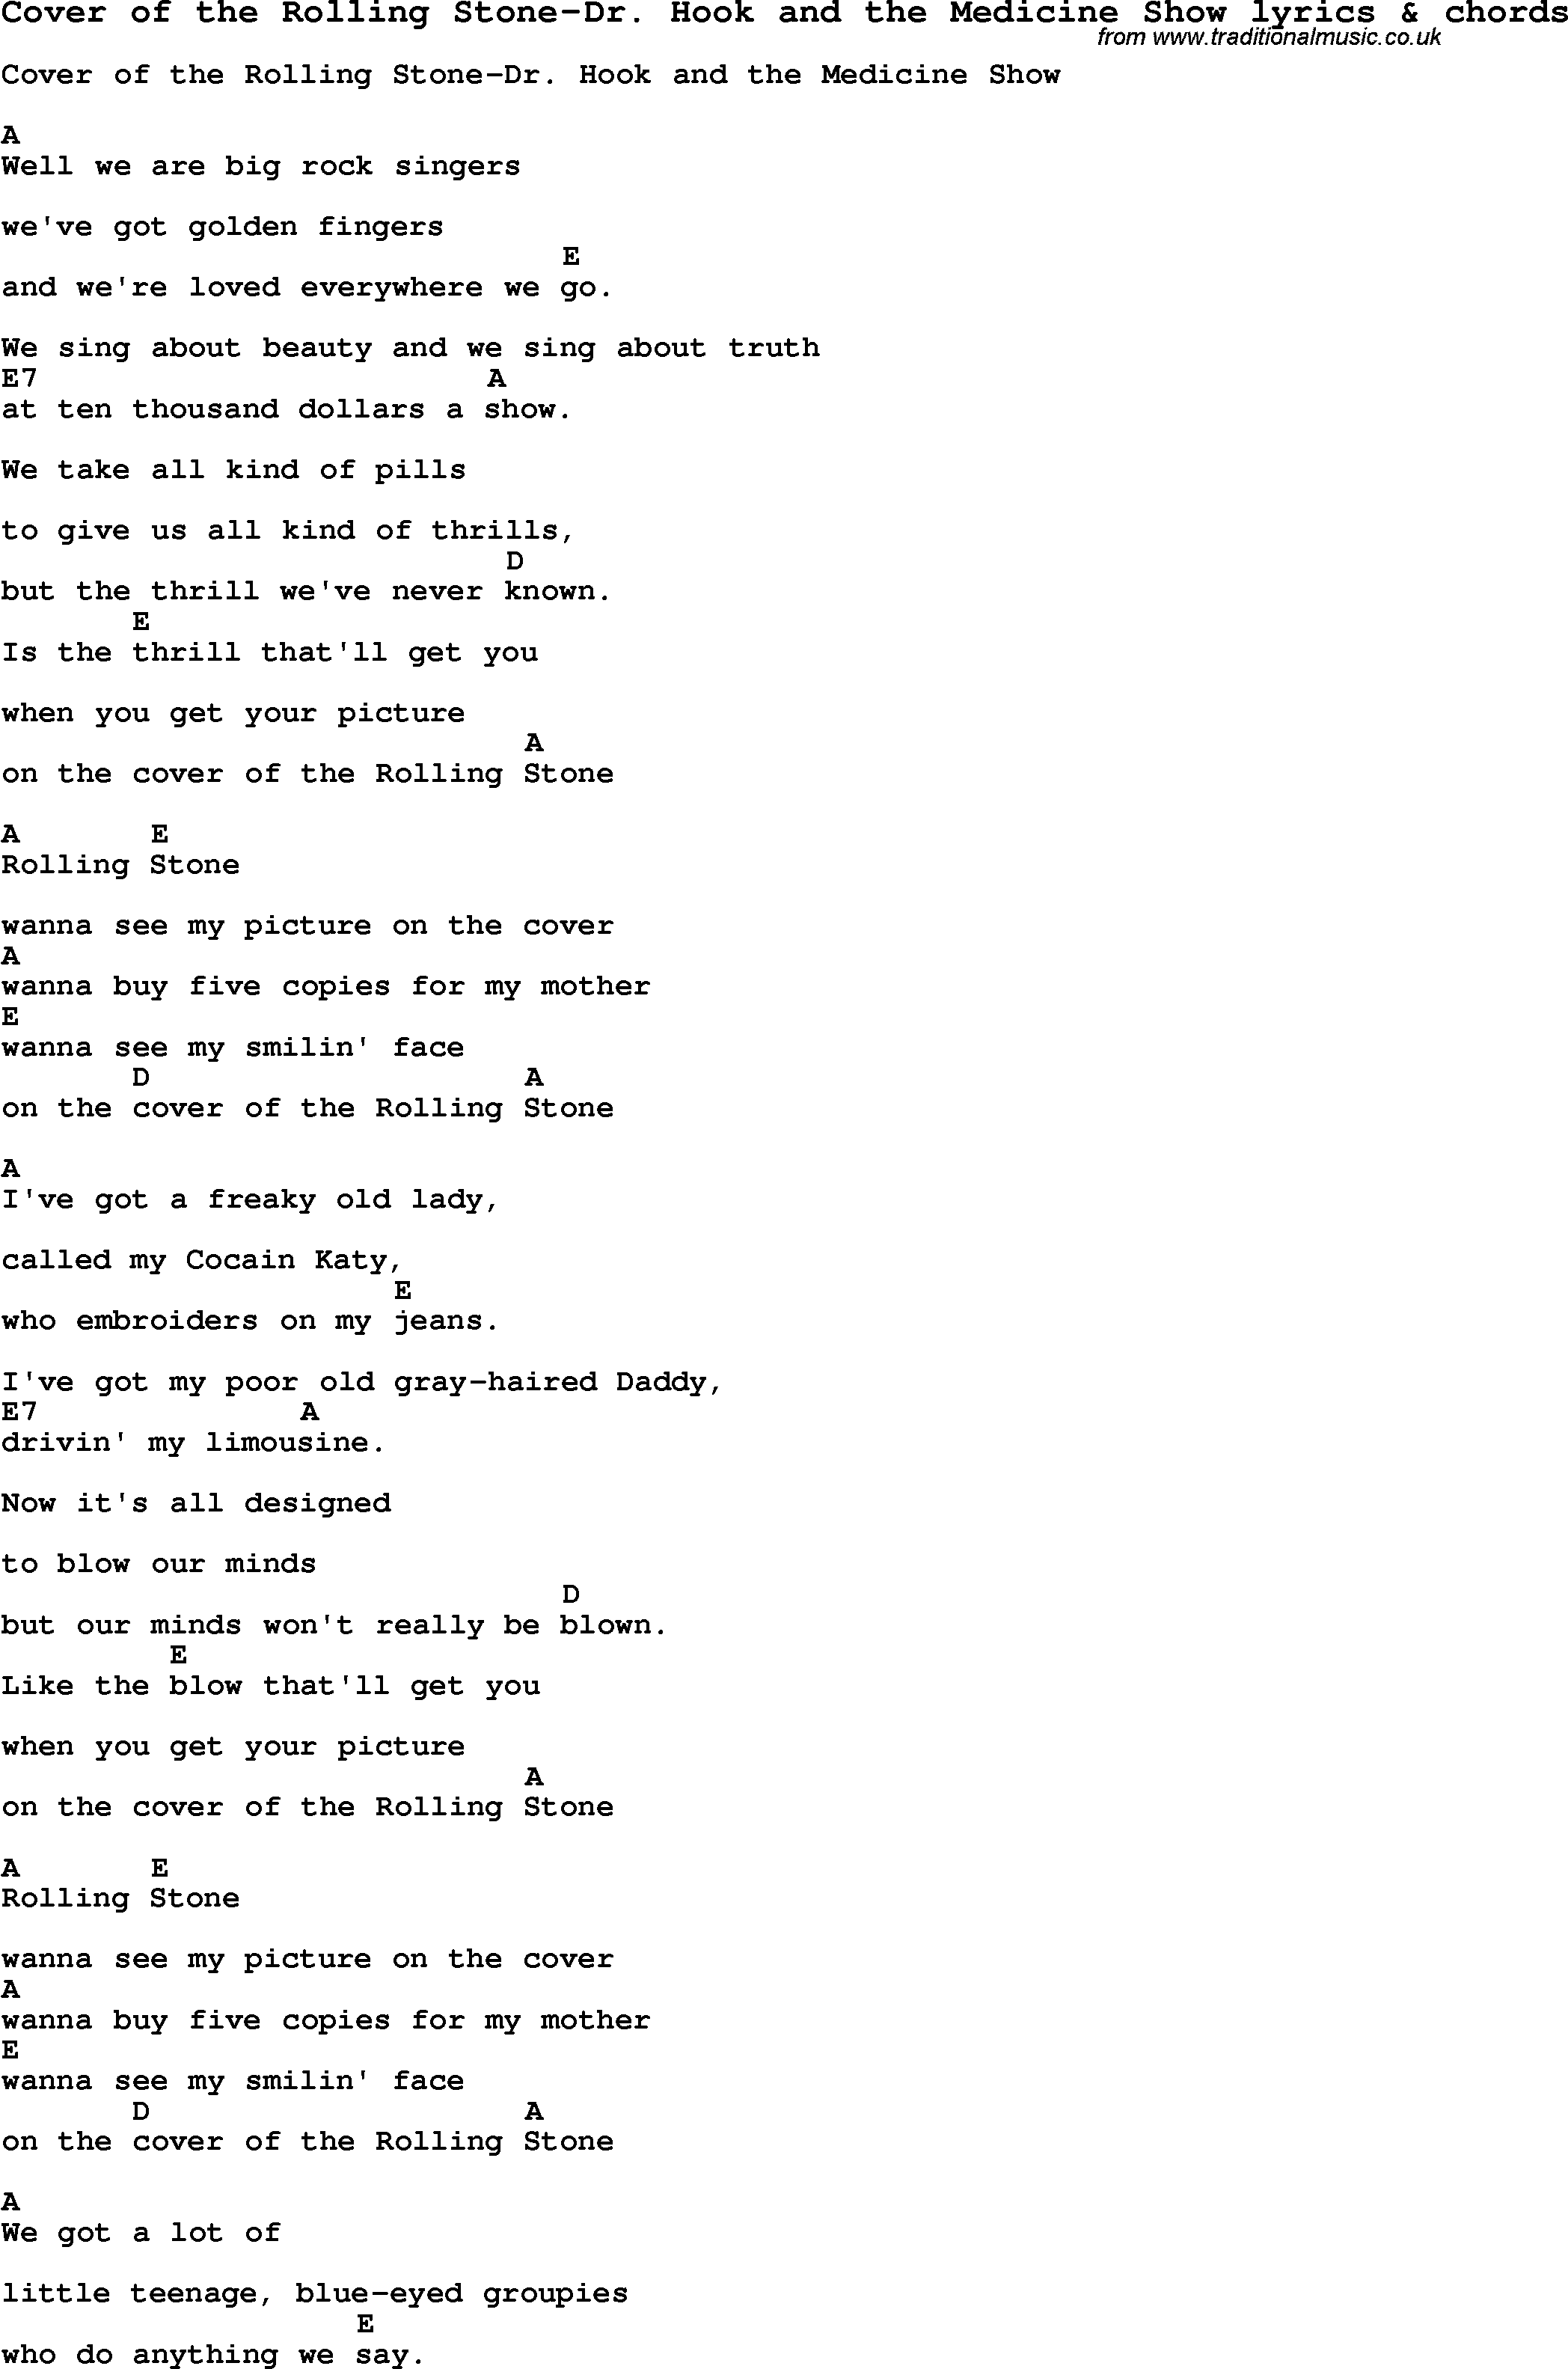 Love Song Lyrics for: Cover of the Rolling Stone-Dr. Hook and the Medicine Show with chords for Ukulele, Guitar Banjo etc.